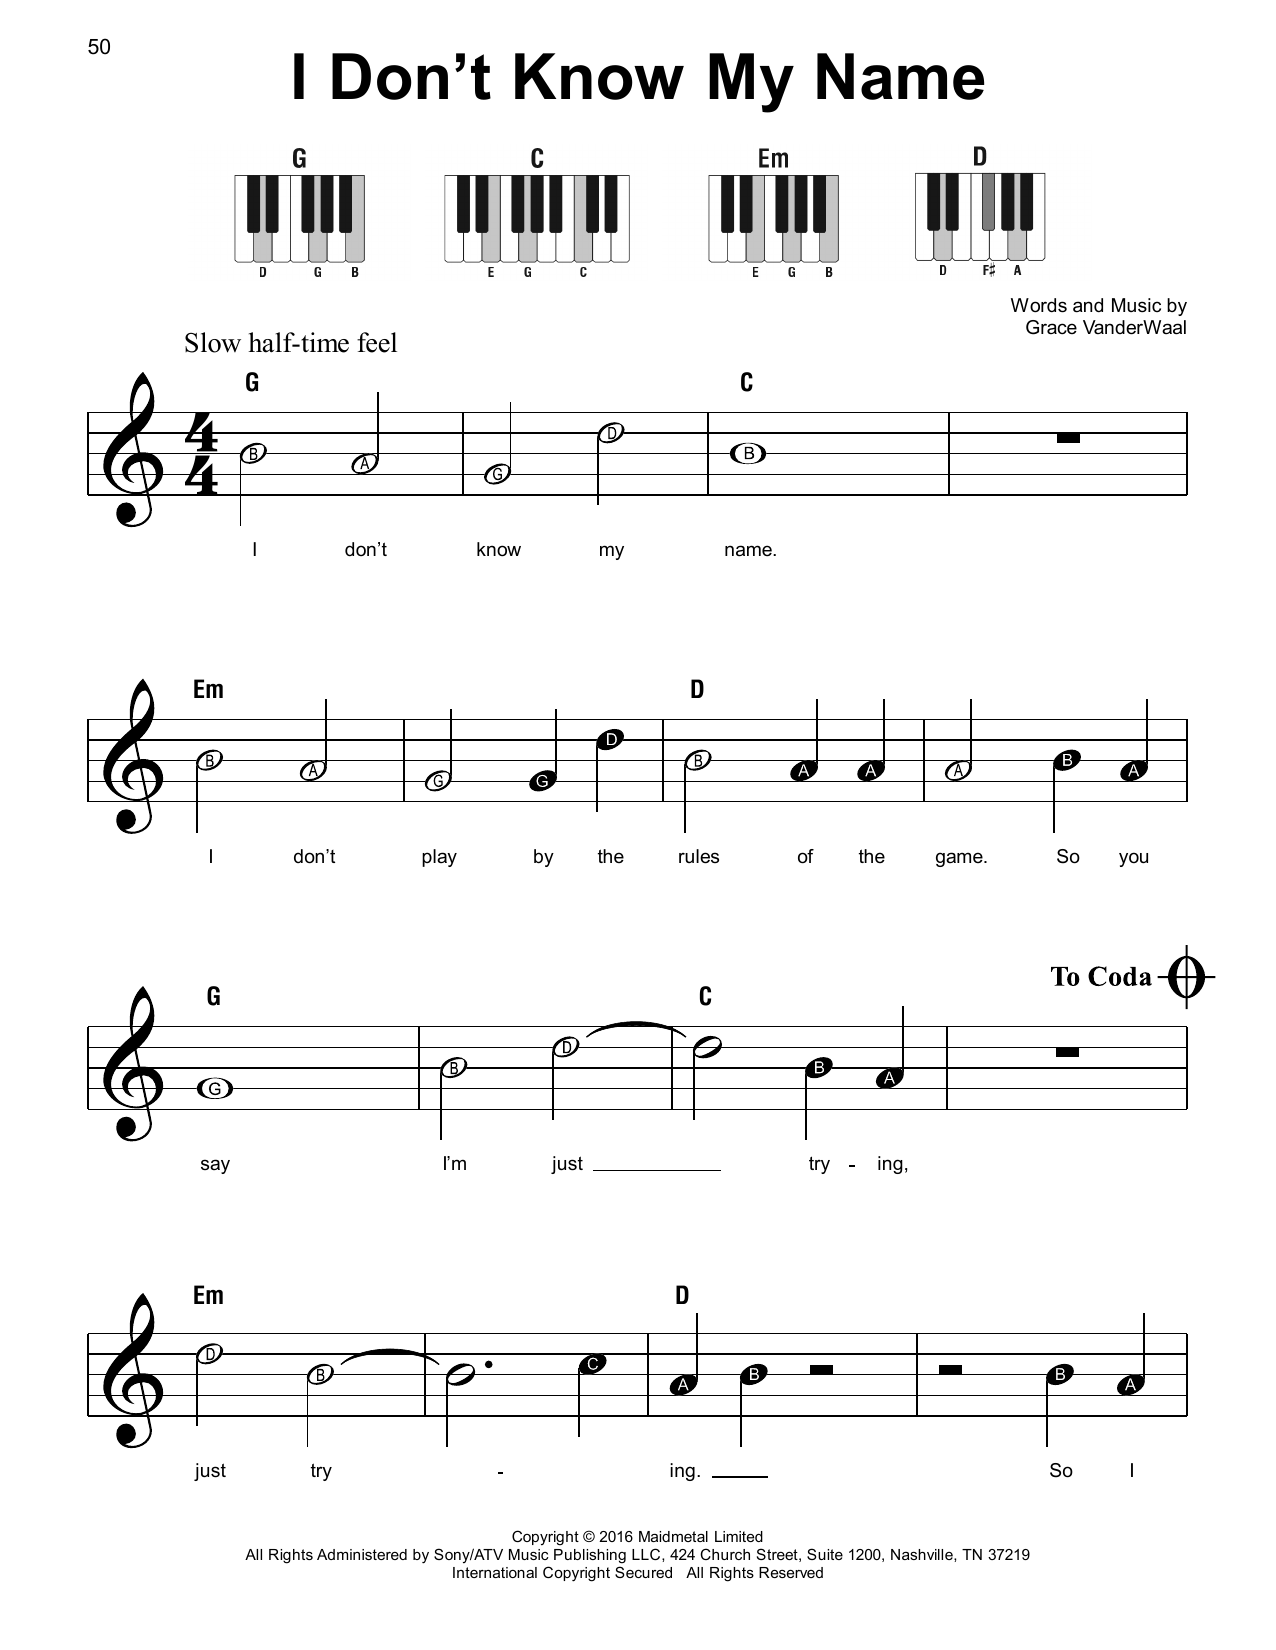 Download Grace VanderWaal I Don't Know My Name Sheet Music